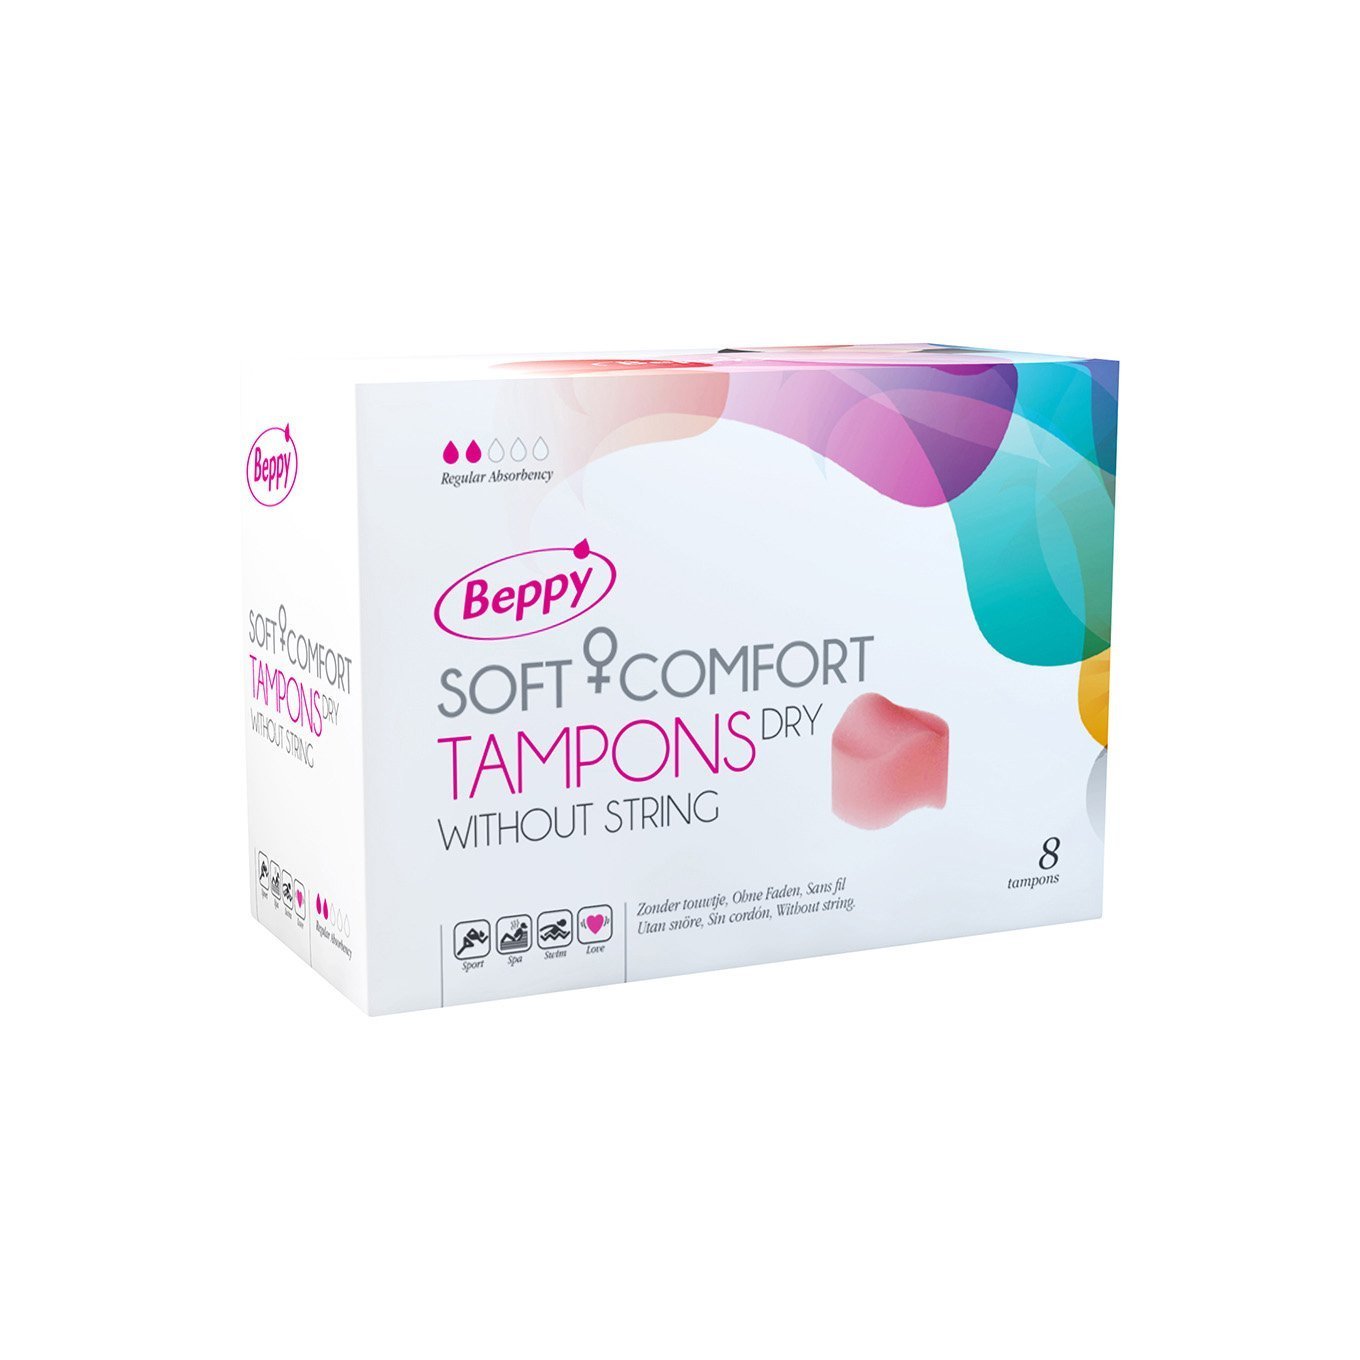 Beppy - Soft Comfort Tampons Without String 8 Pieces (Dry) -  Tampons  Durio.sg